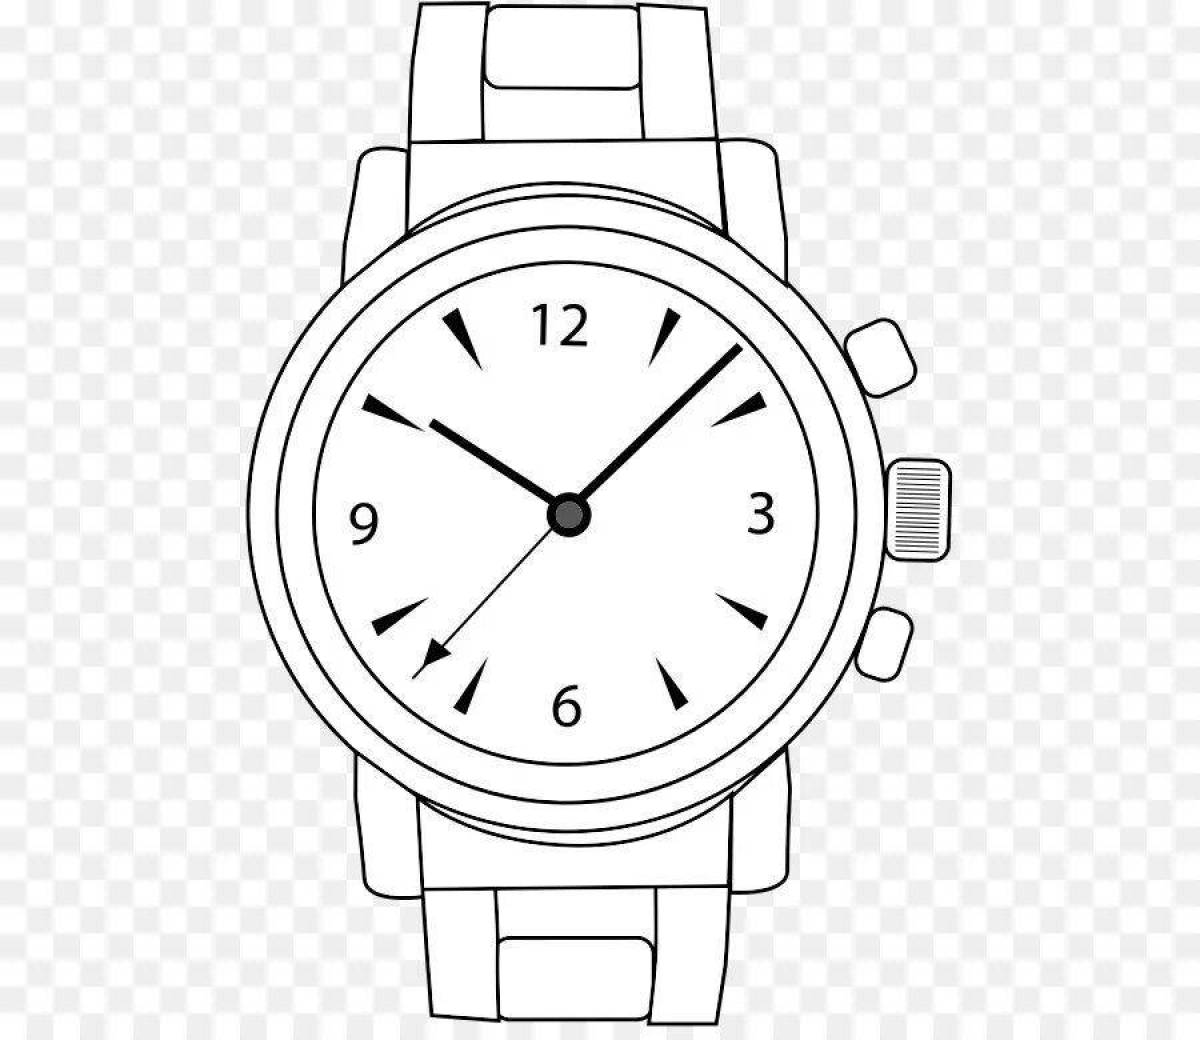 Colouring colorful wrist watch